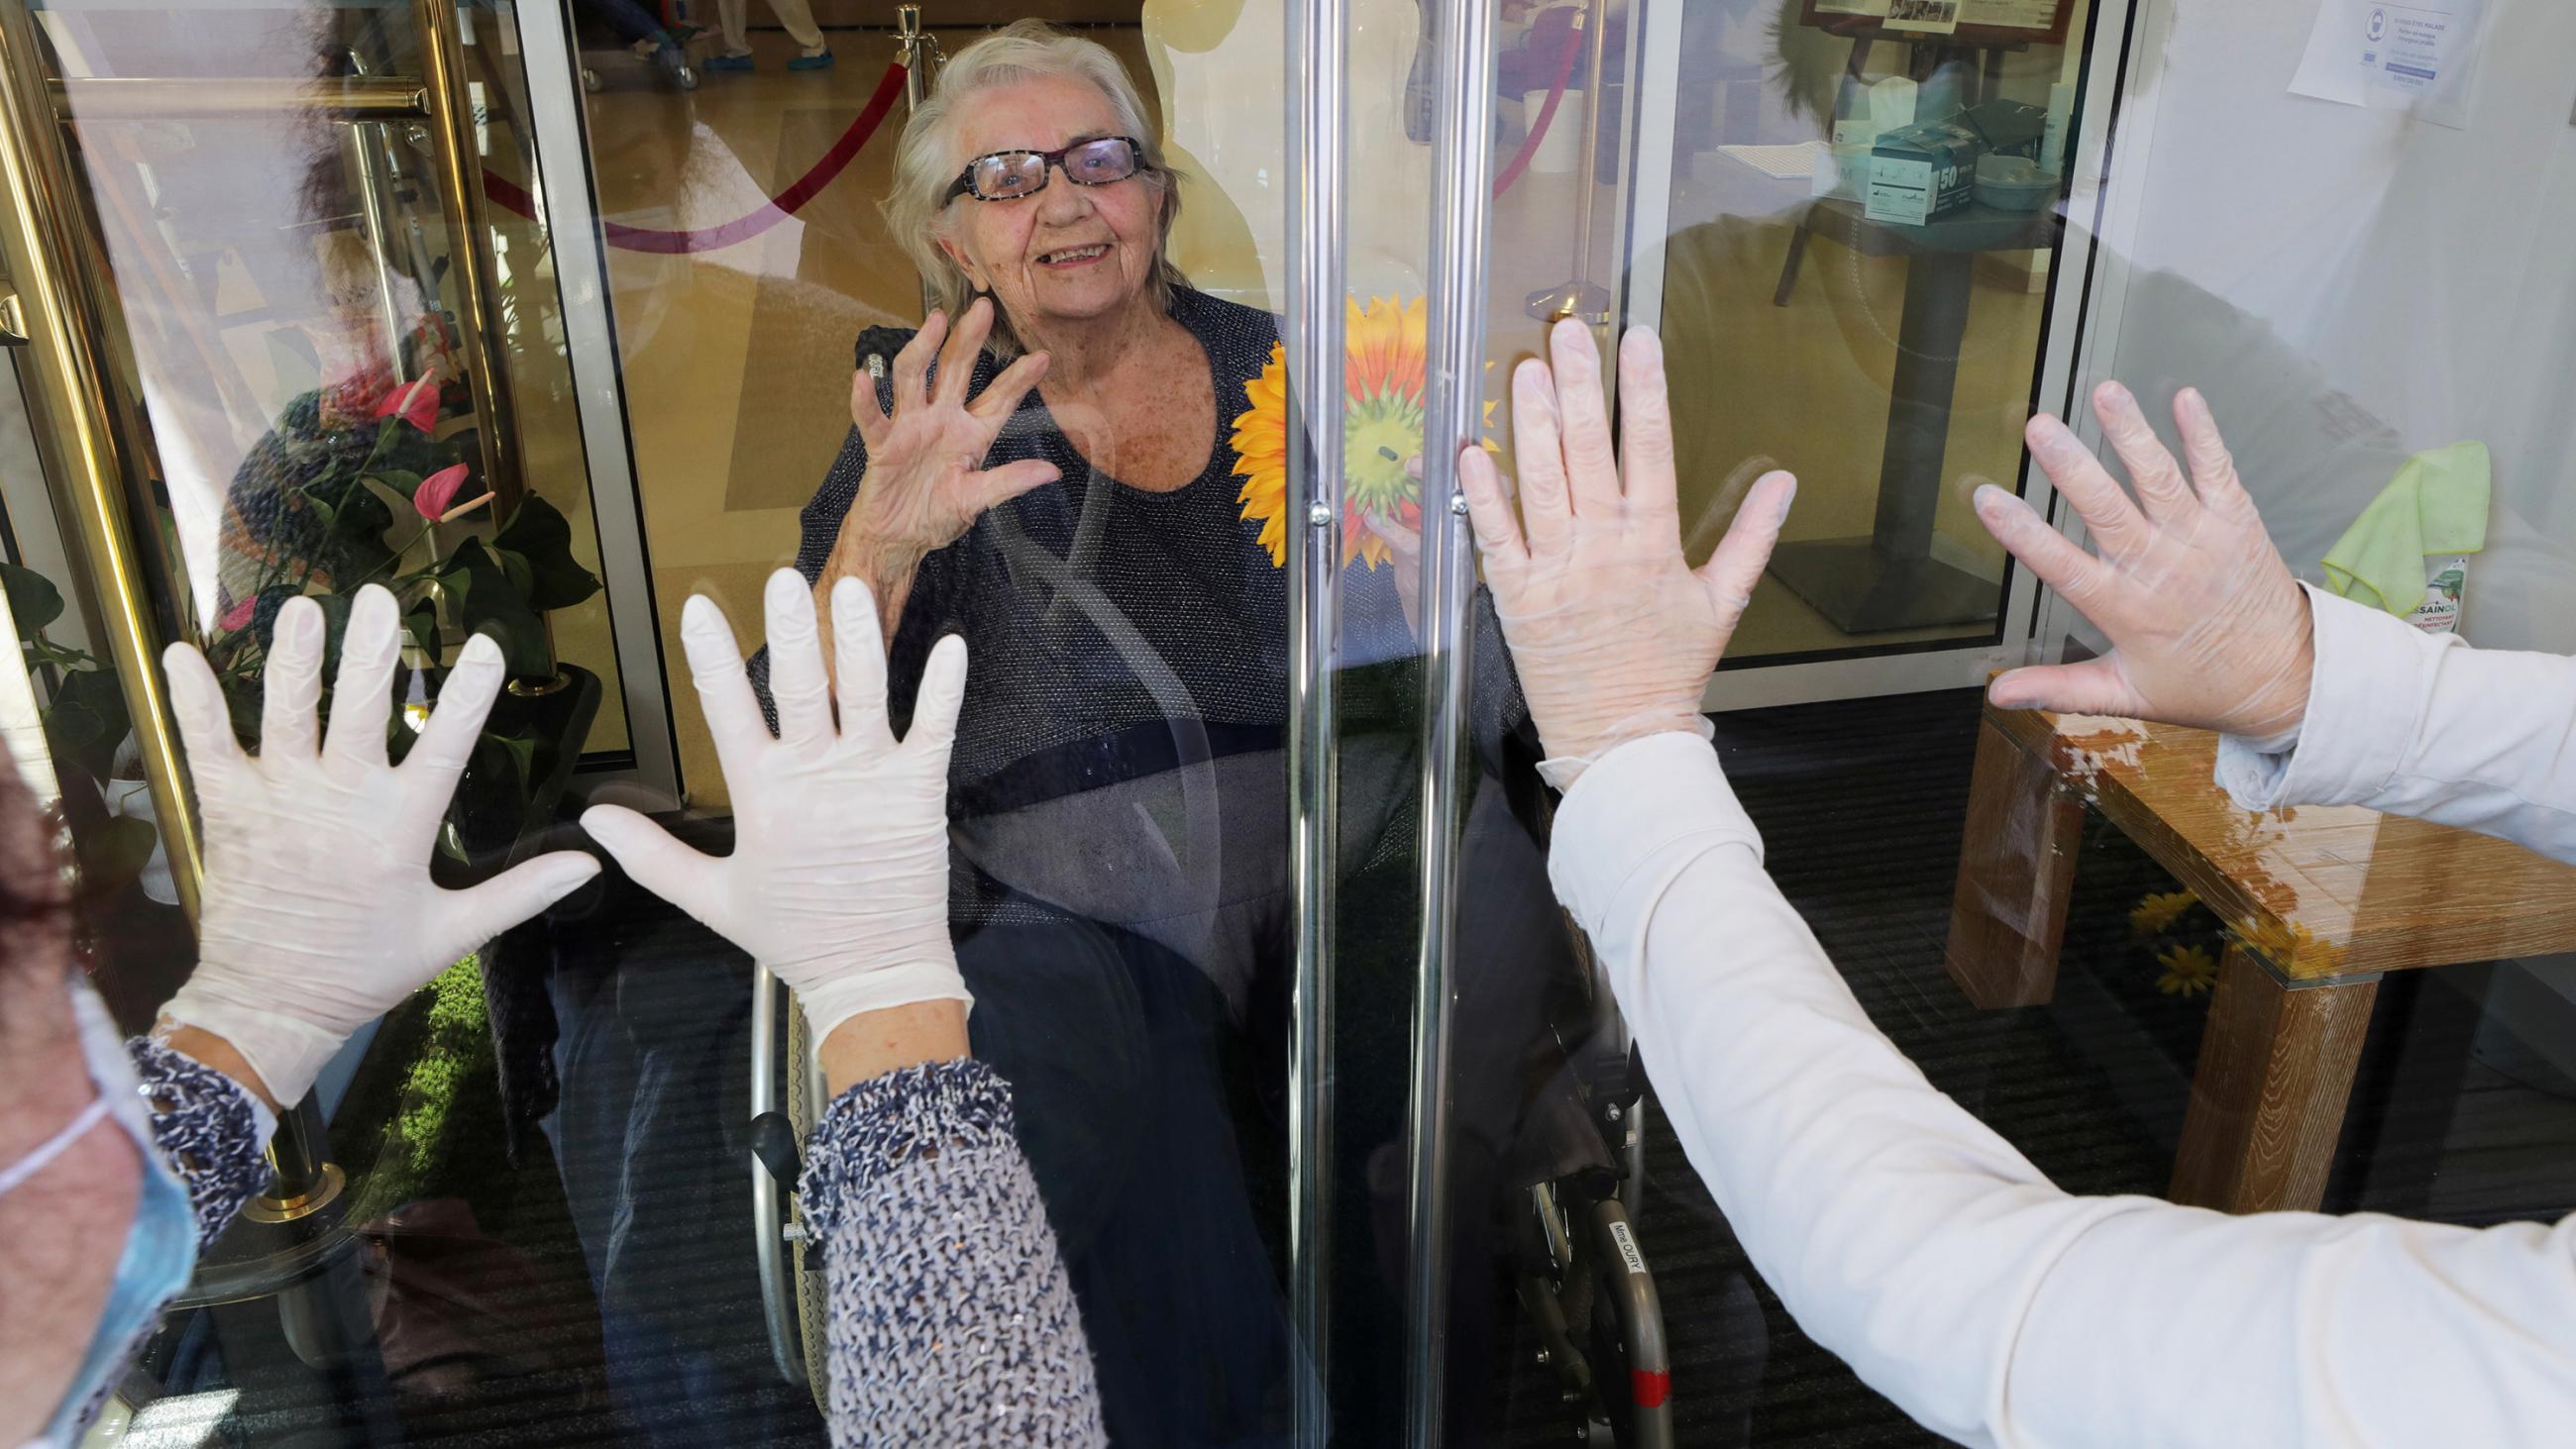 The photo shows an elderly lady looking out at delight while her daughters' hands are held up to the glass. 